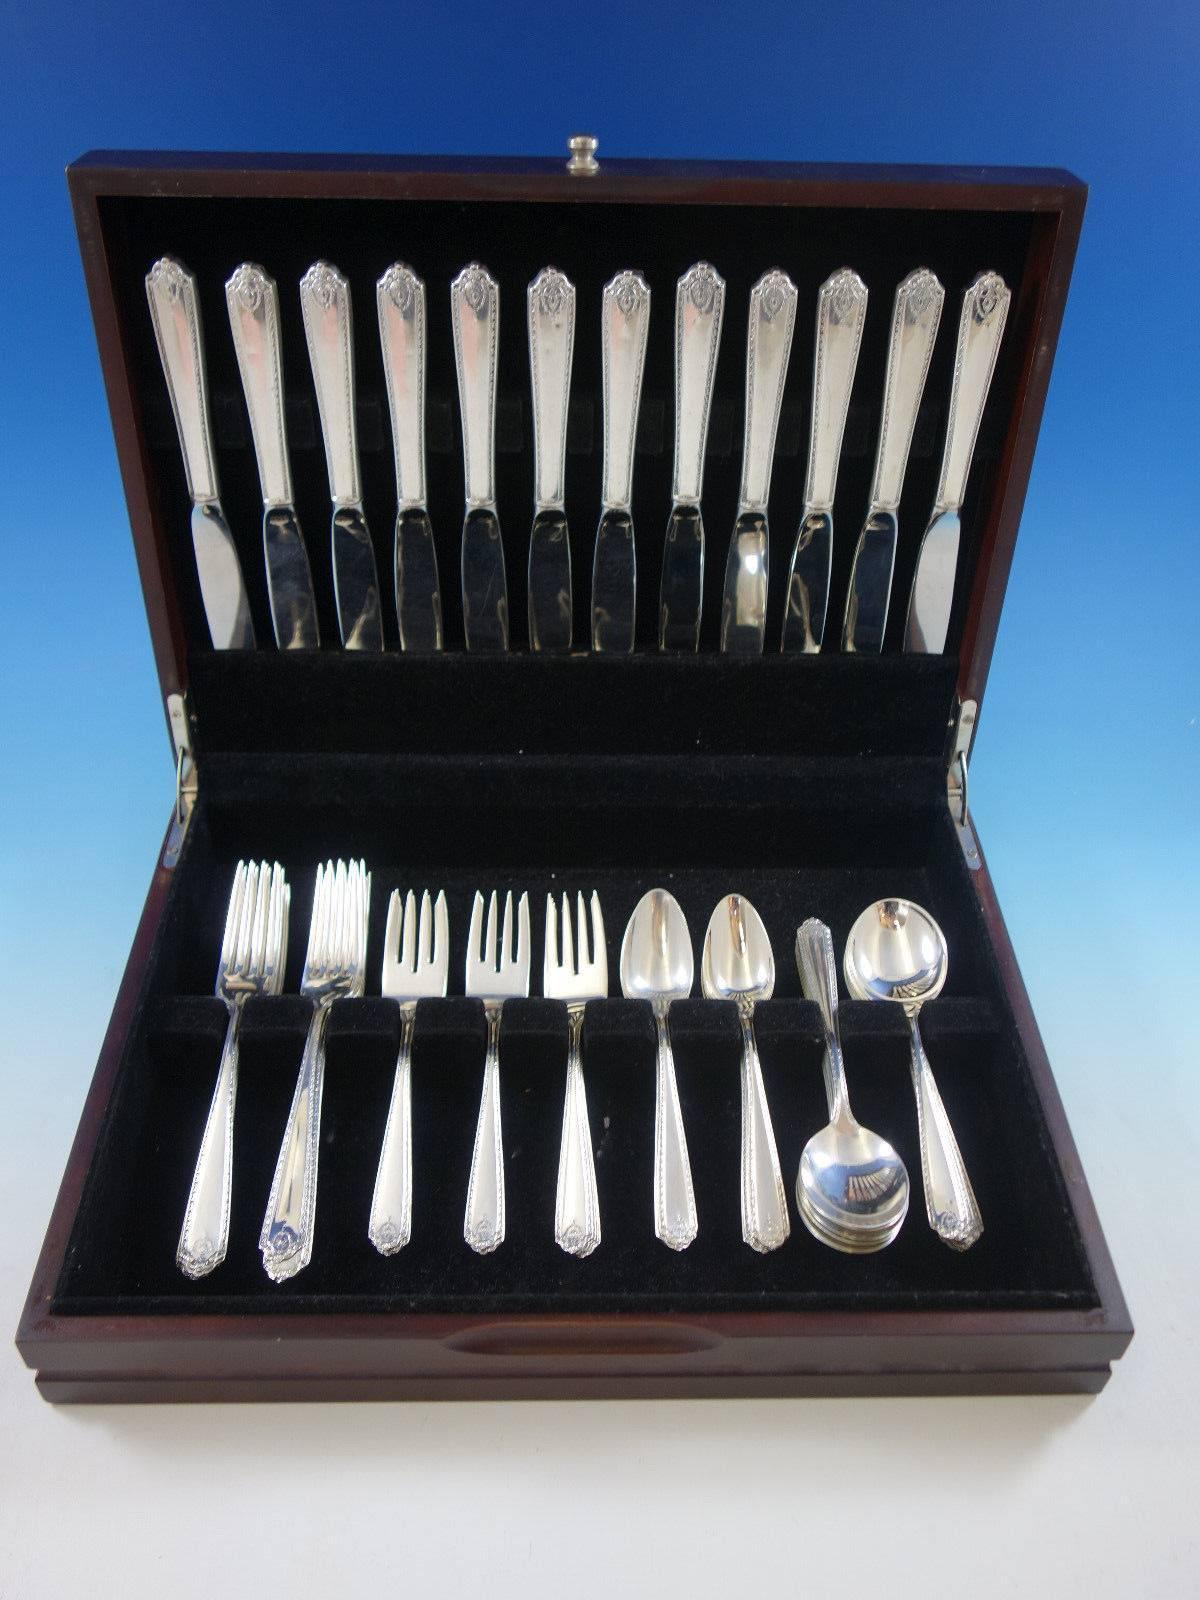 Lady Hilton by Westmorland sterling silver flatware set of 60 pieces. This set includes: 12 knives, 9 1/8